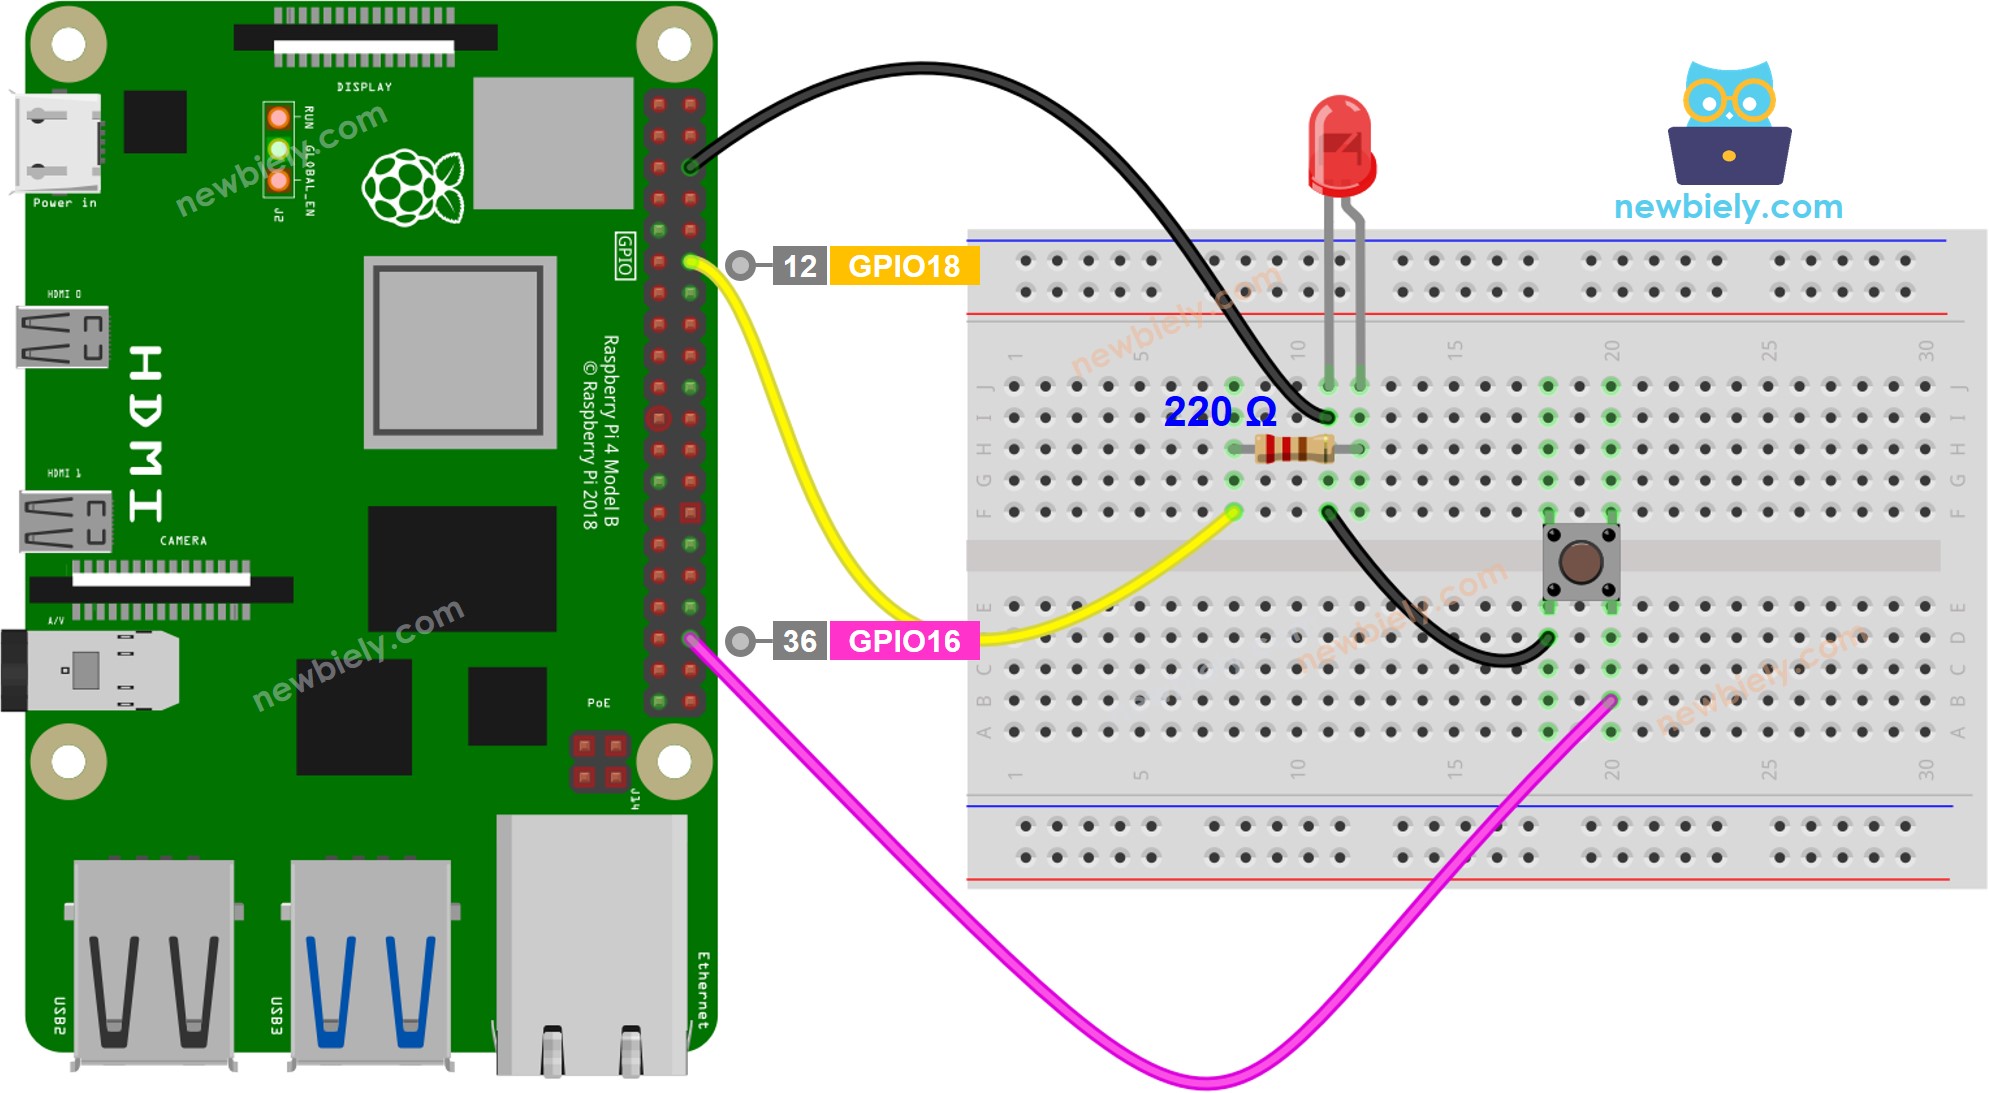 The wiring diagram between Raspberry Pi and LED